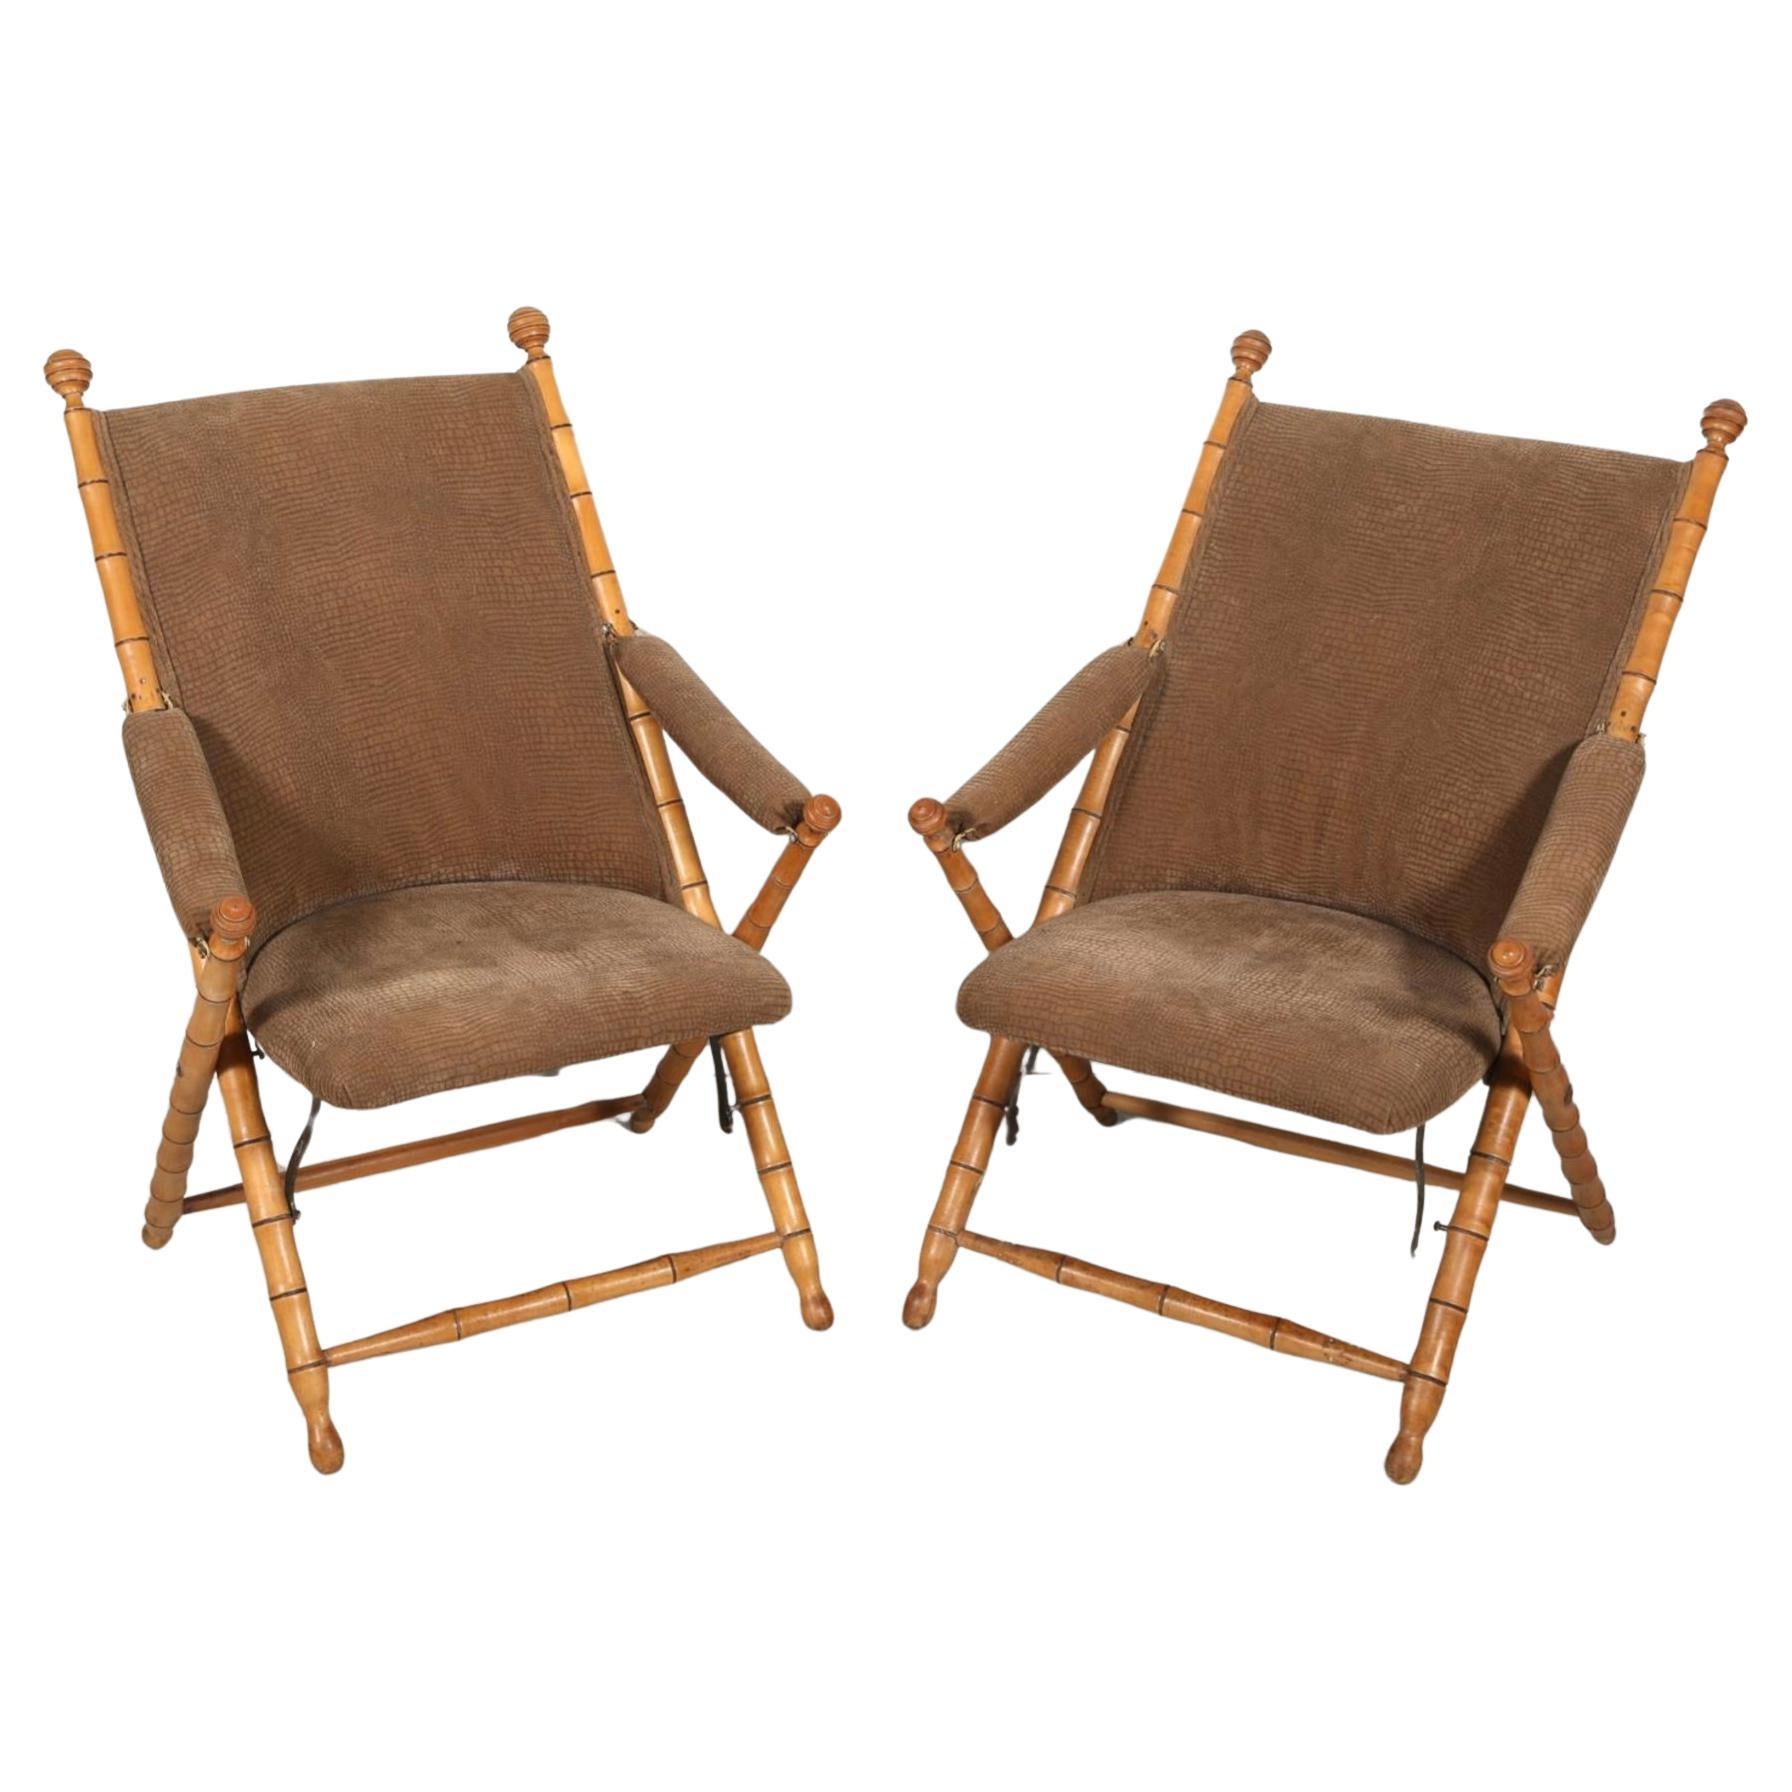  Pair of Antique Faux Bamboo Folding Campaign Lounge Chairs